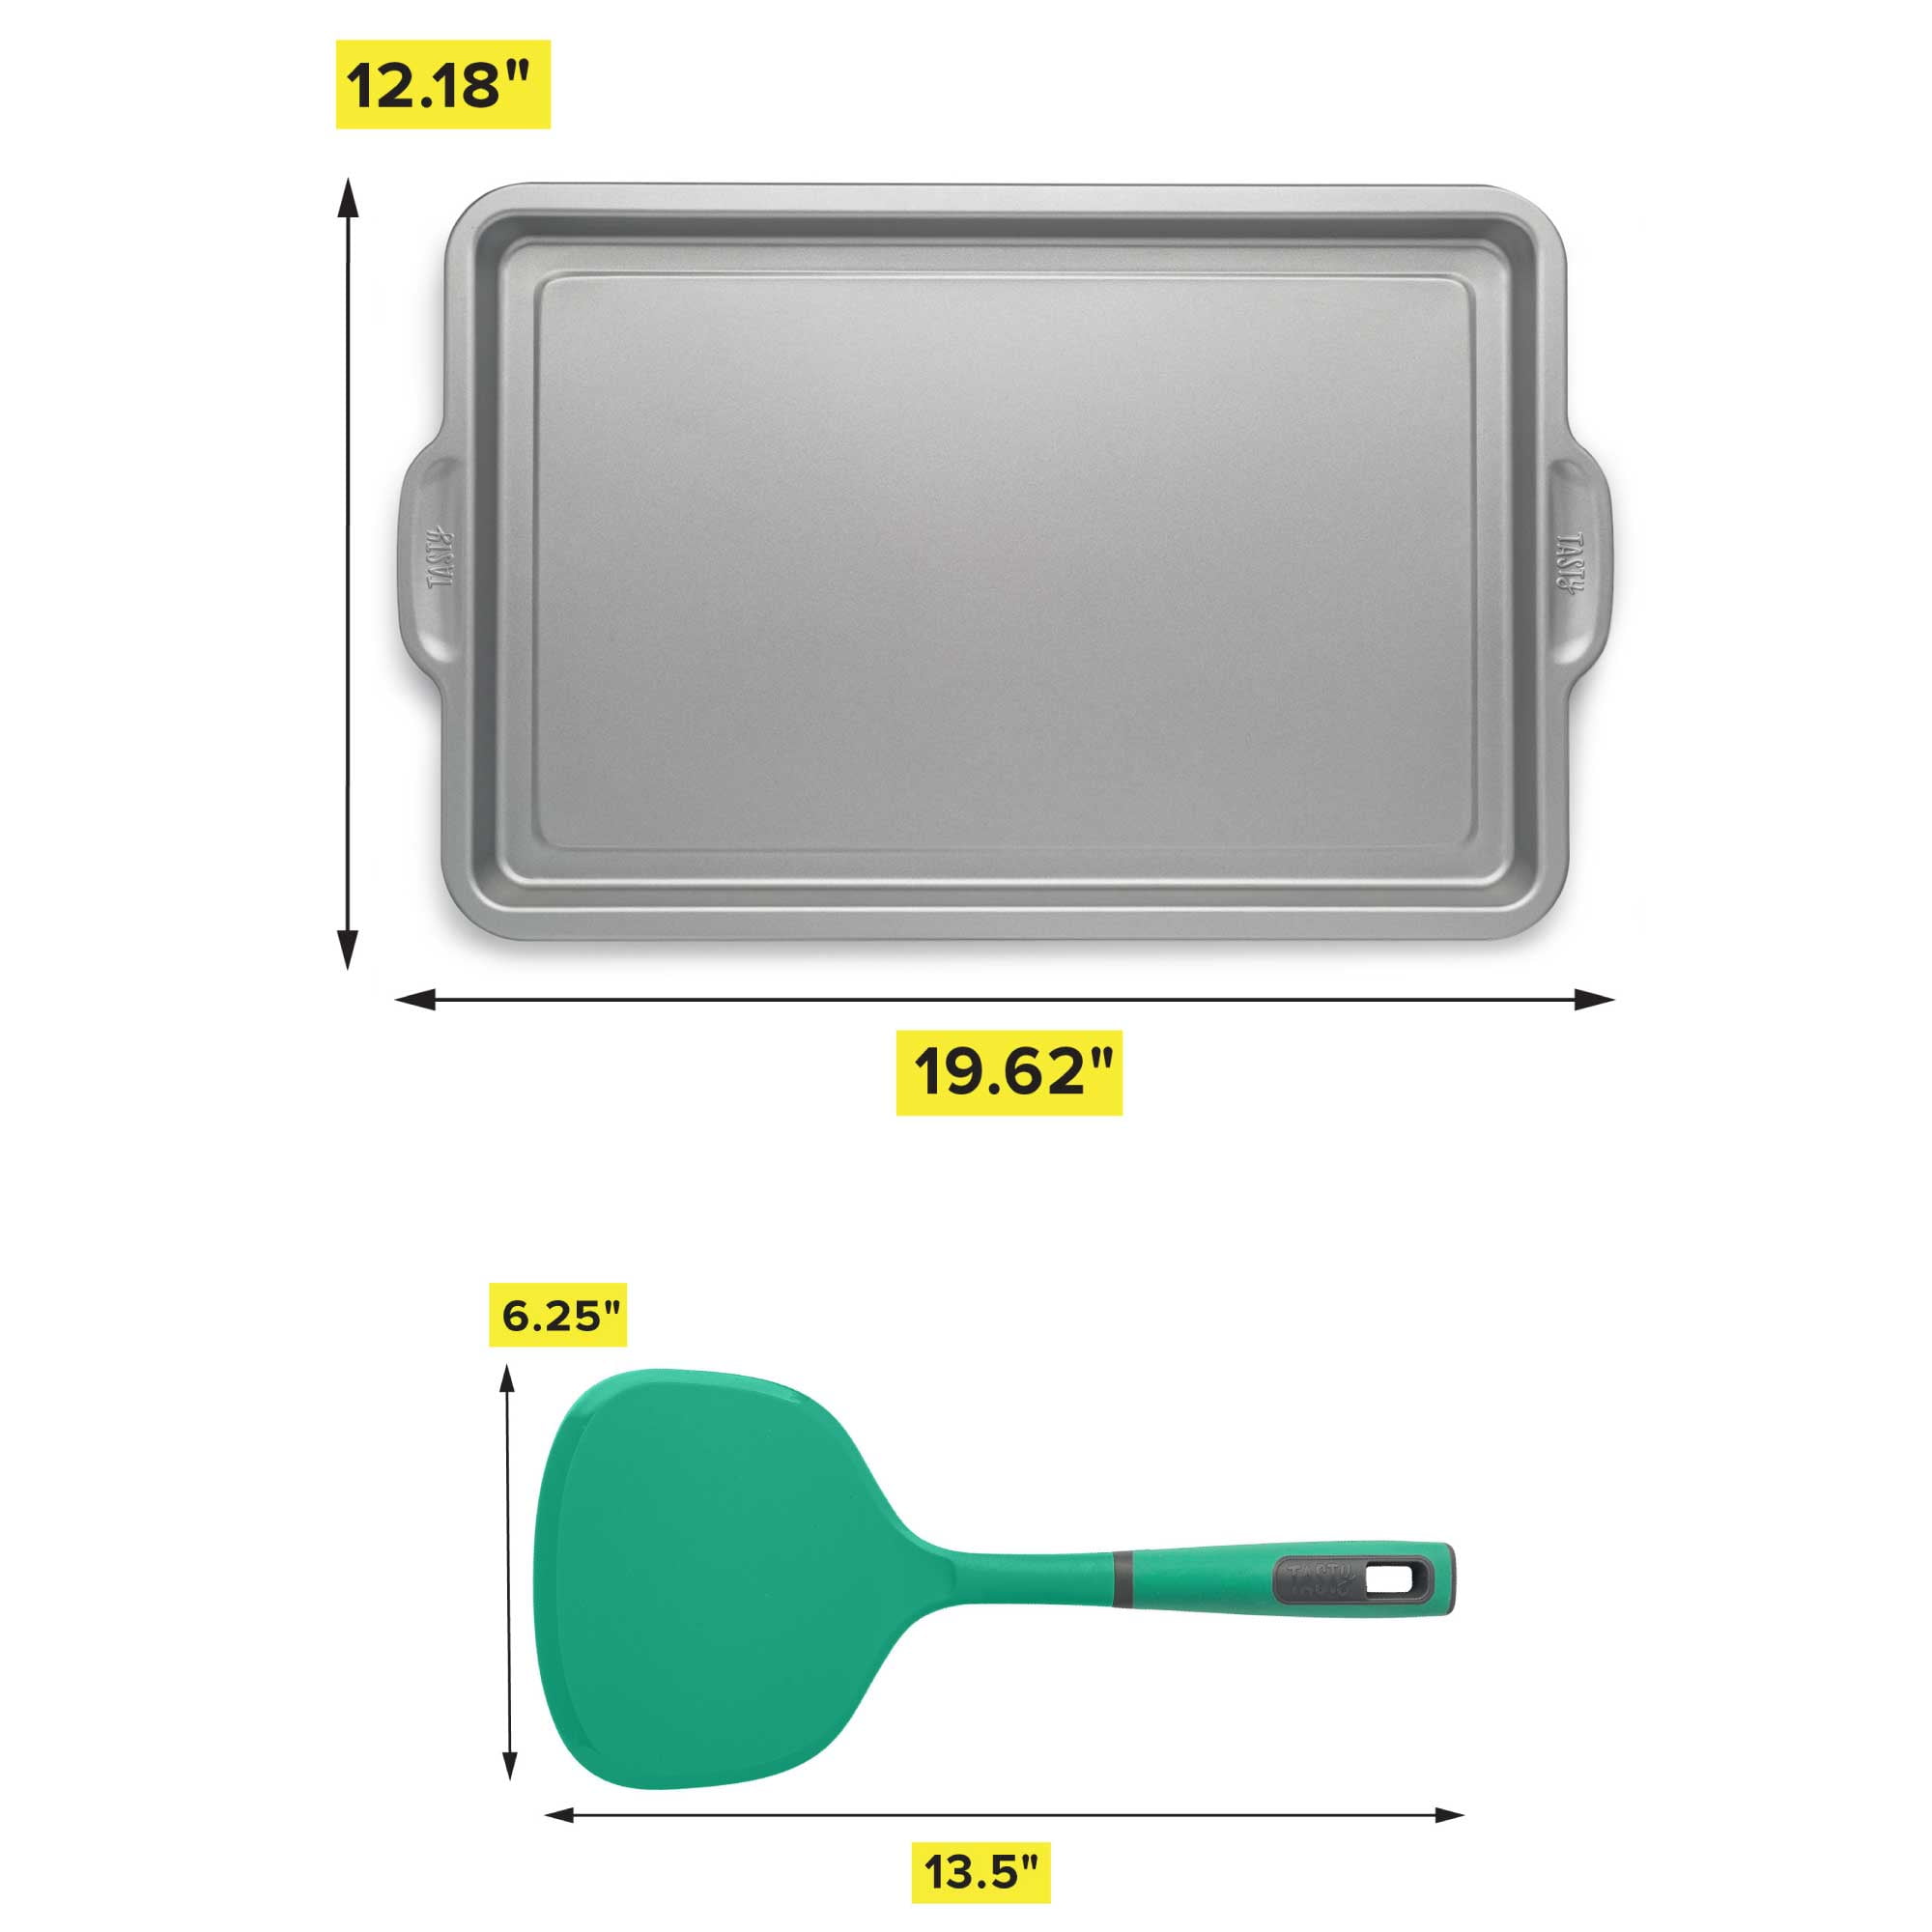 Good Cook Nonstick Cookie Sheet, Large 17 inch x 11 inch, 2 Pack, Size: 11 inch x 17 inch, 07675304022802